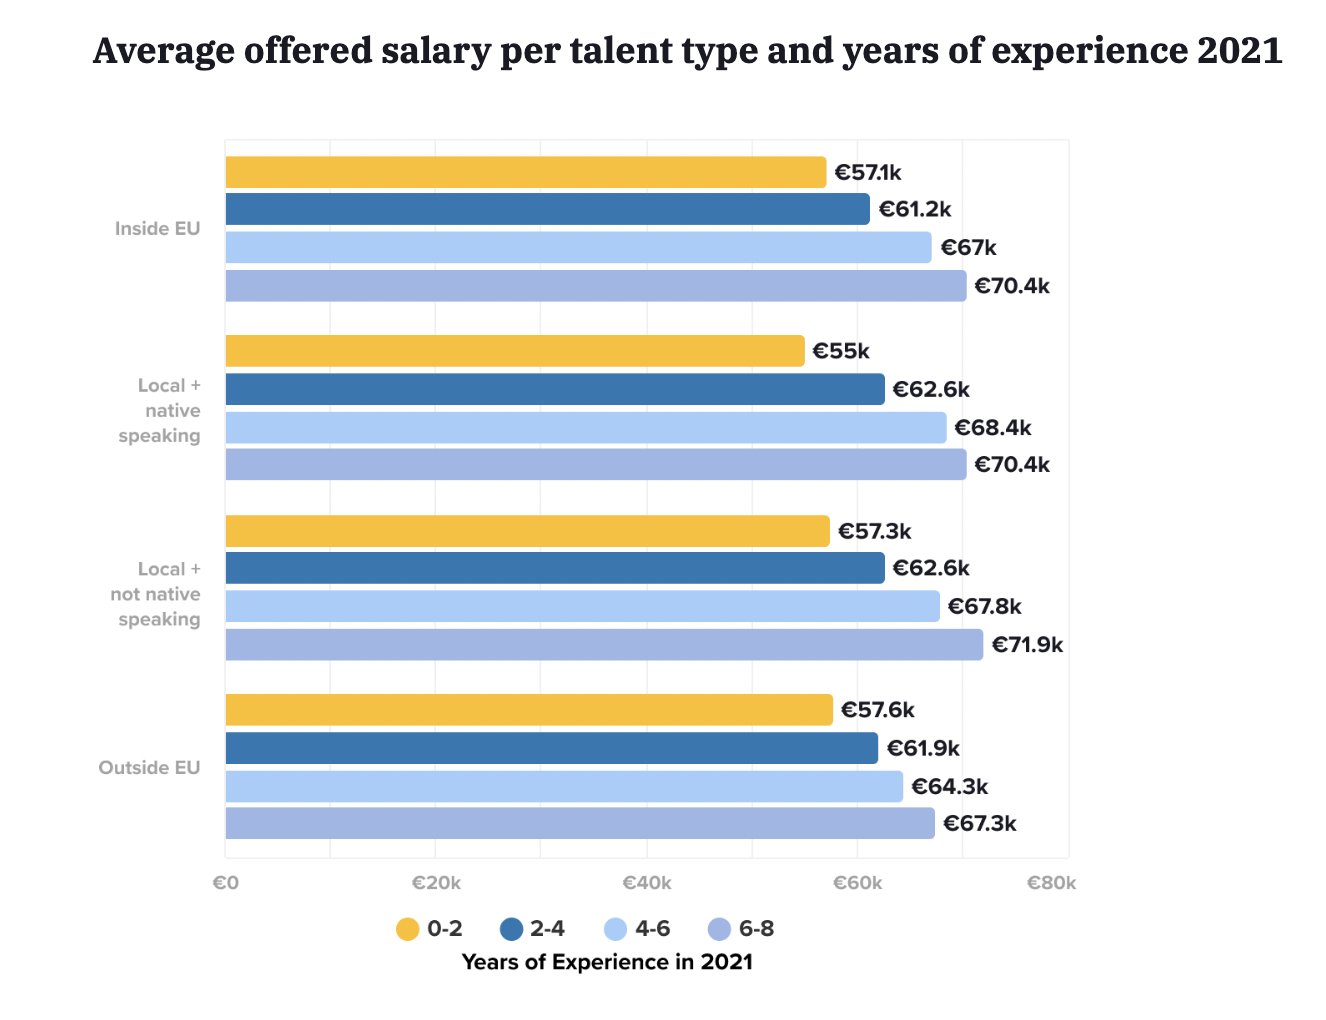  Average offered salary per talent type and years of experience in Germany in 2021 